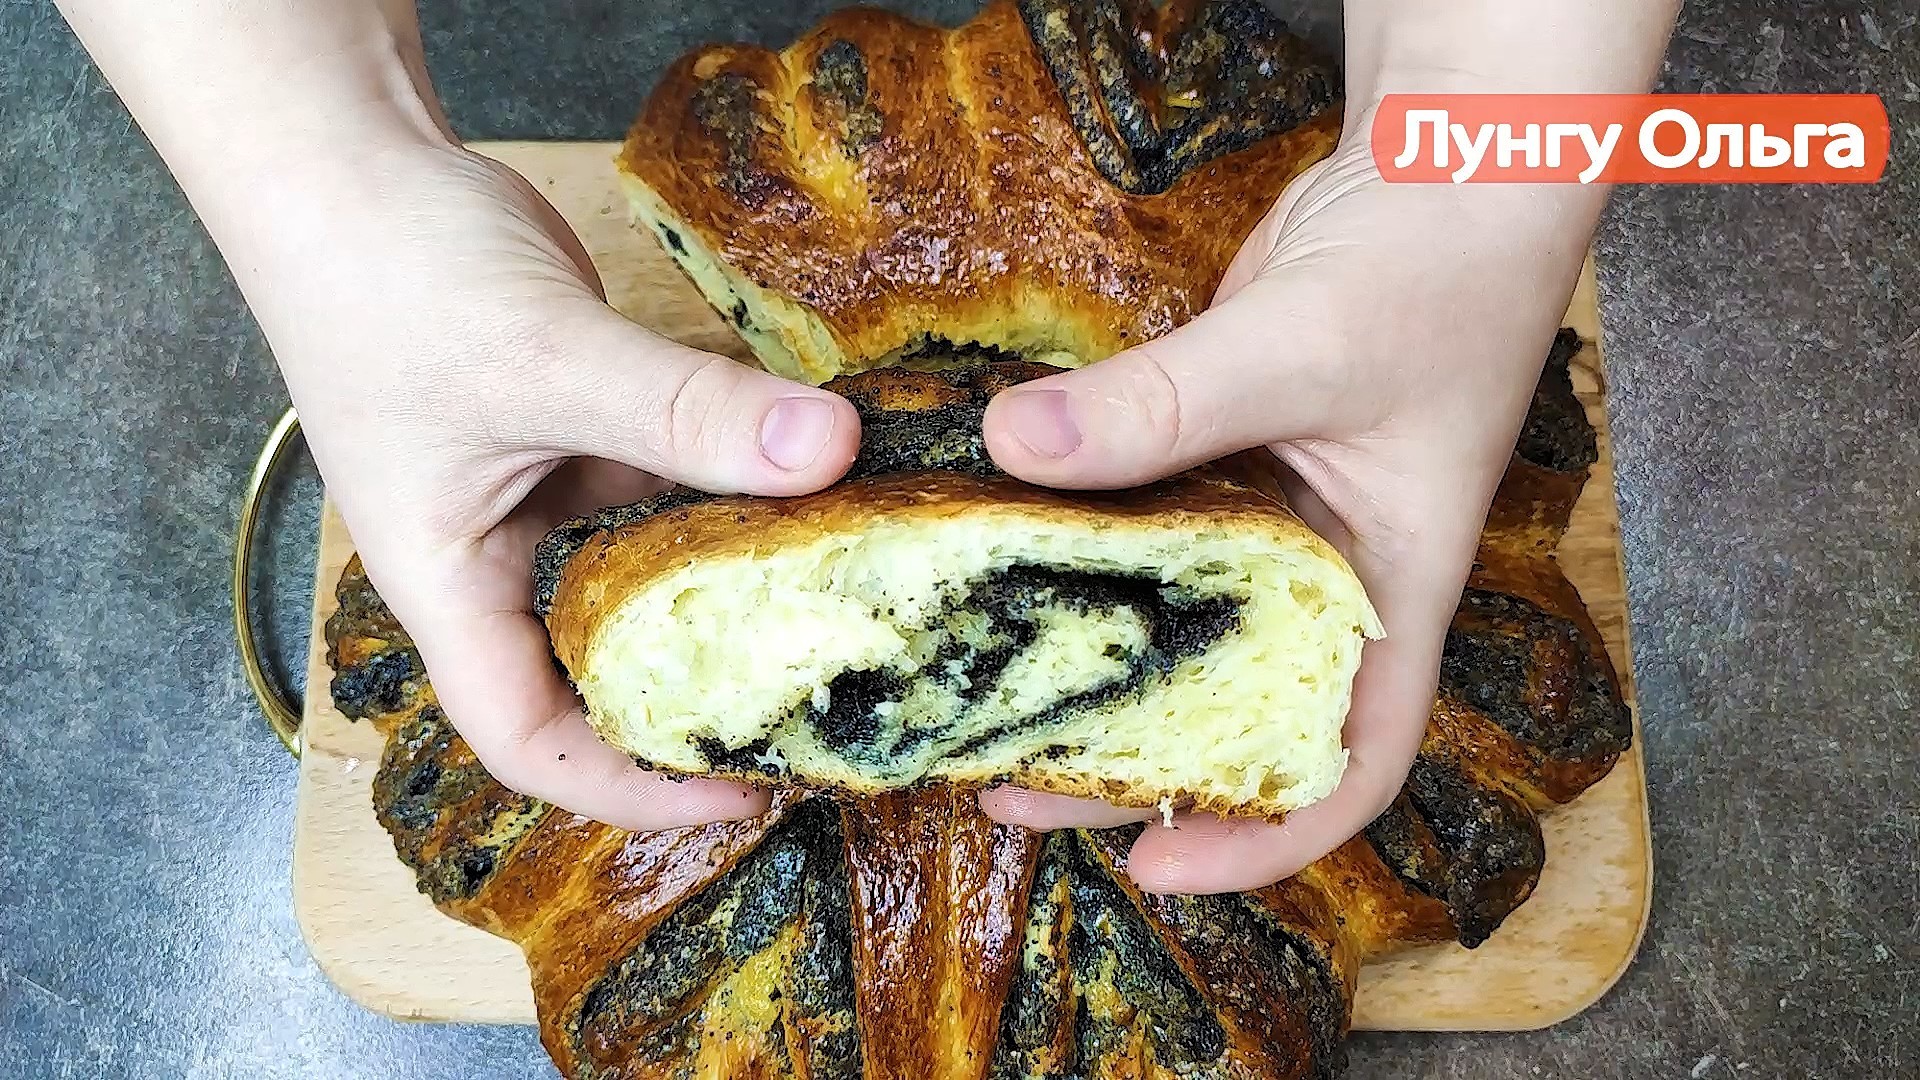 Pie with poppy seeds made from rich yeast dough - My, Poppy seed pie, Butter dough, Yeast dough, Video, Longpost, Video recipe, Recipe, Pie, Cooking